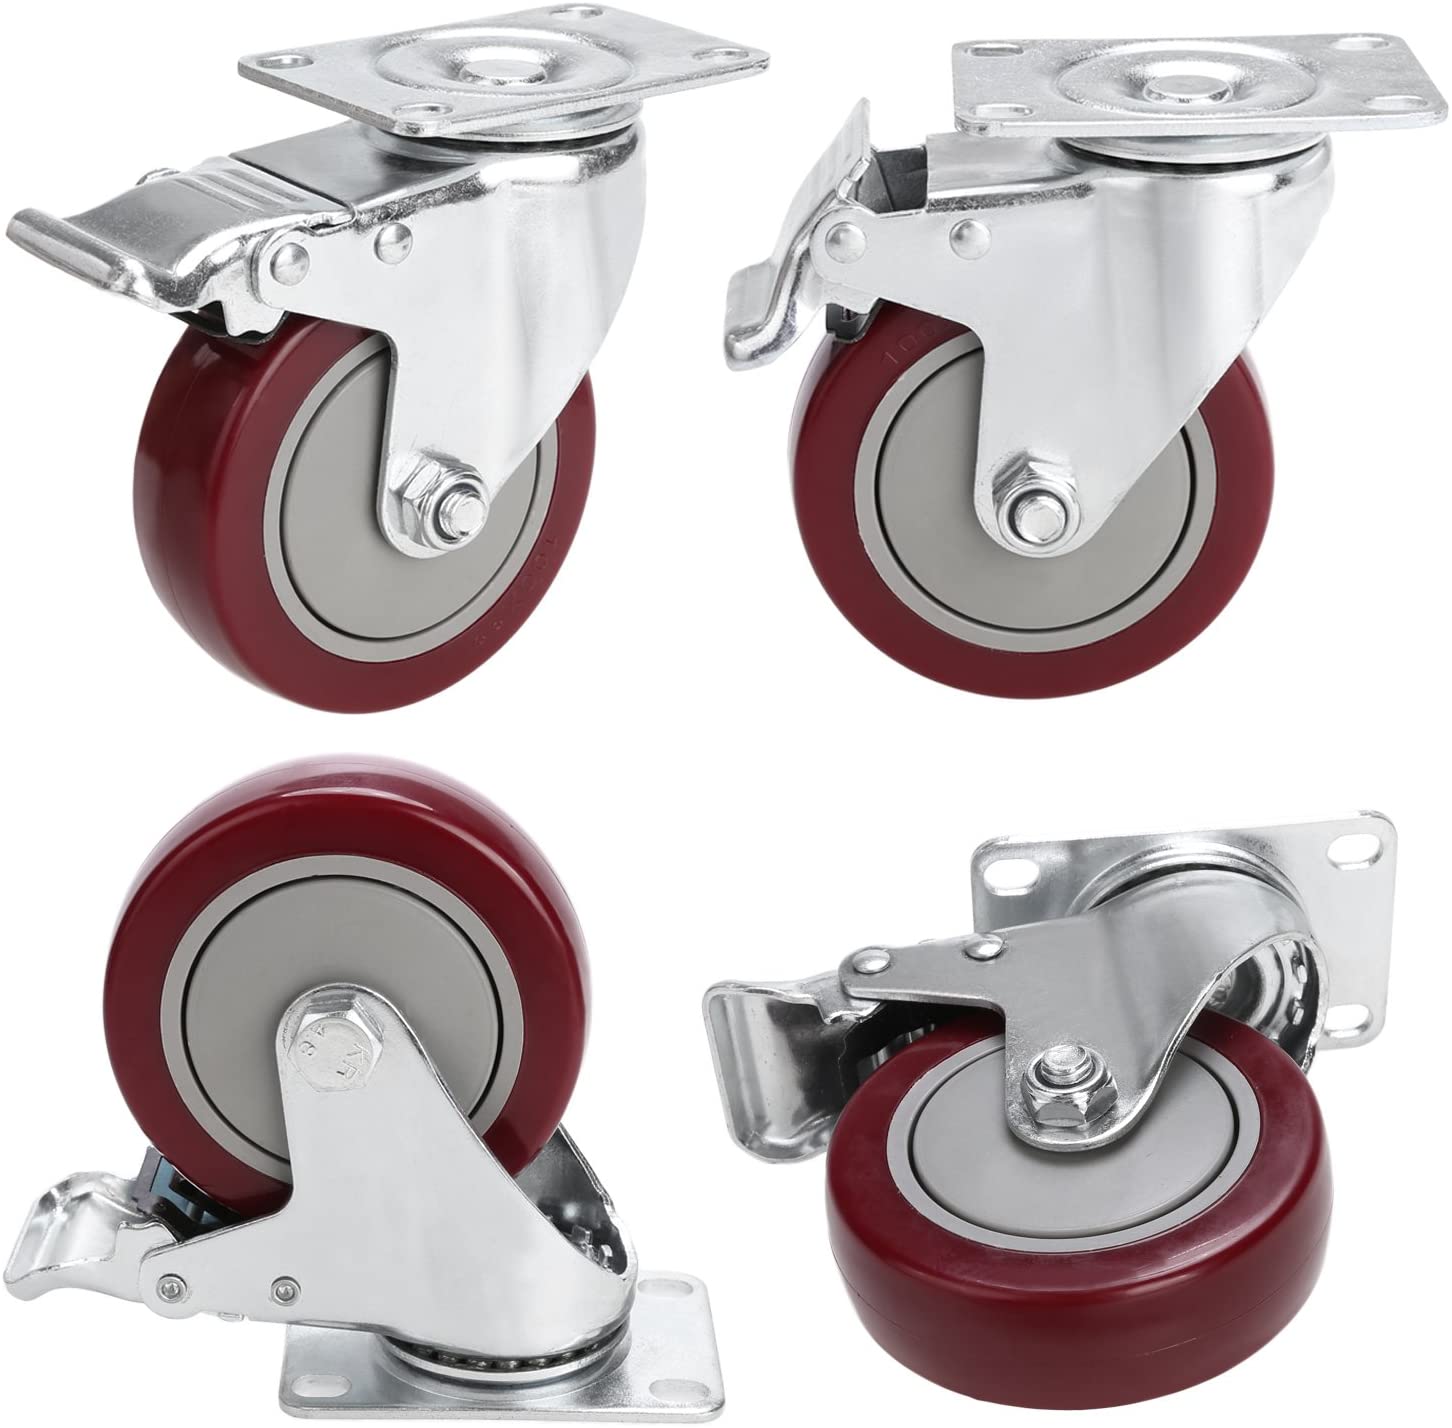 QERNTPEY 4Pcs Furniture Casters,Swivel Casters,Household Replacement Casters,Transportation Casters,for Kitchens,Bedrooms,Garages,Rubber Casters,Silent and Wear-Resistant,4swivel,20mm/0.8in 